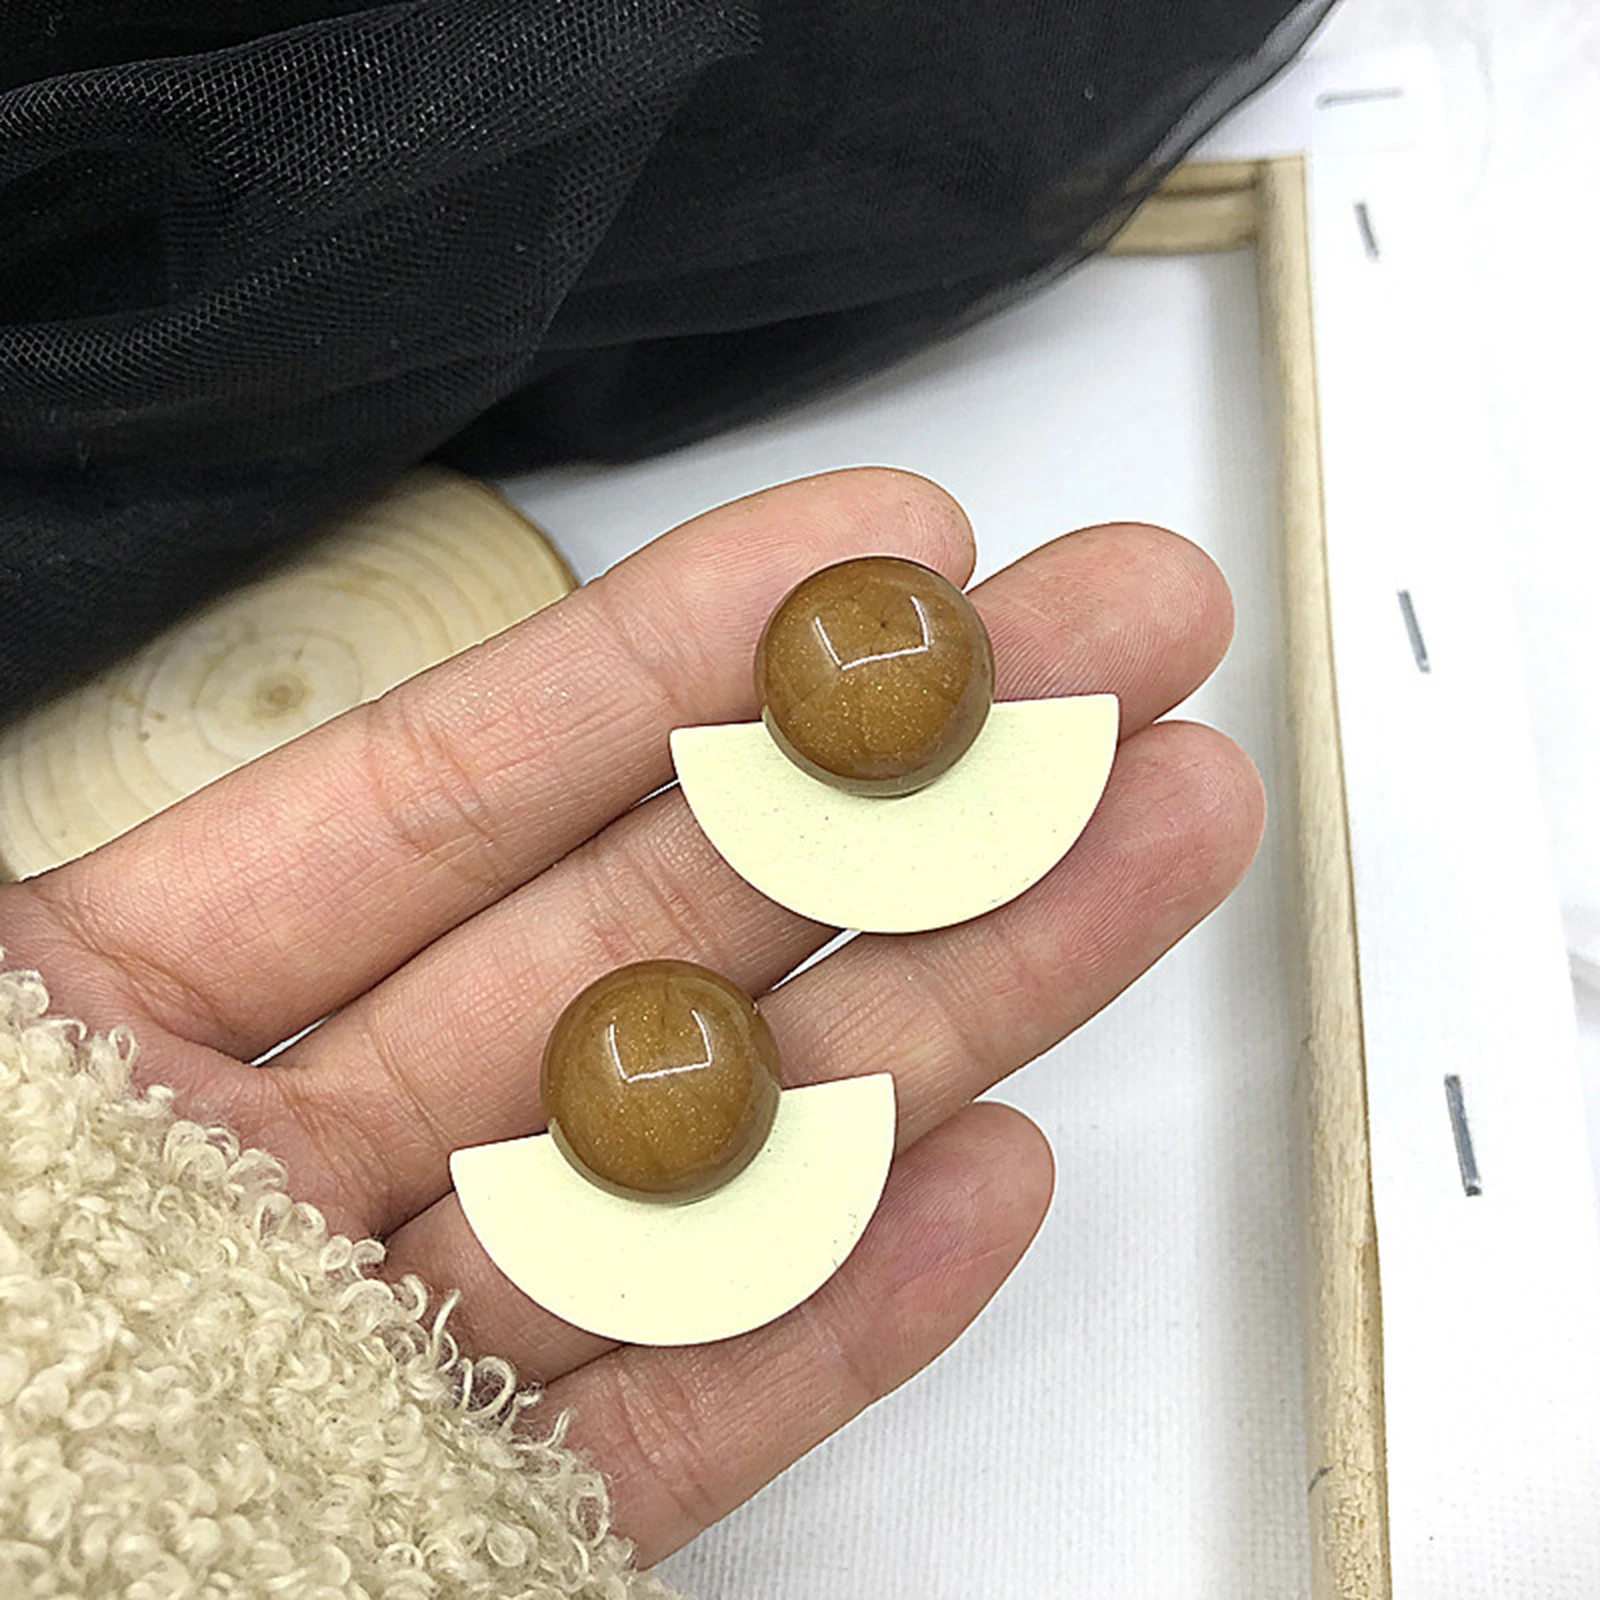 

8Seasons Fashion Acrylic & Wood Ear Post Stud Earrings Yellow/Brown Round Half Round Women Party Club Statement Jewelry,1Pair